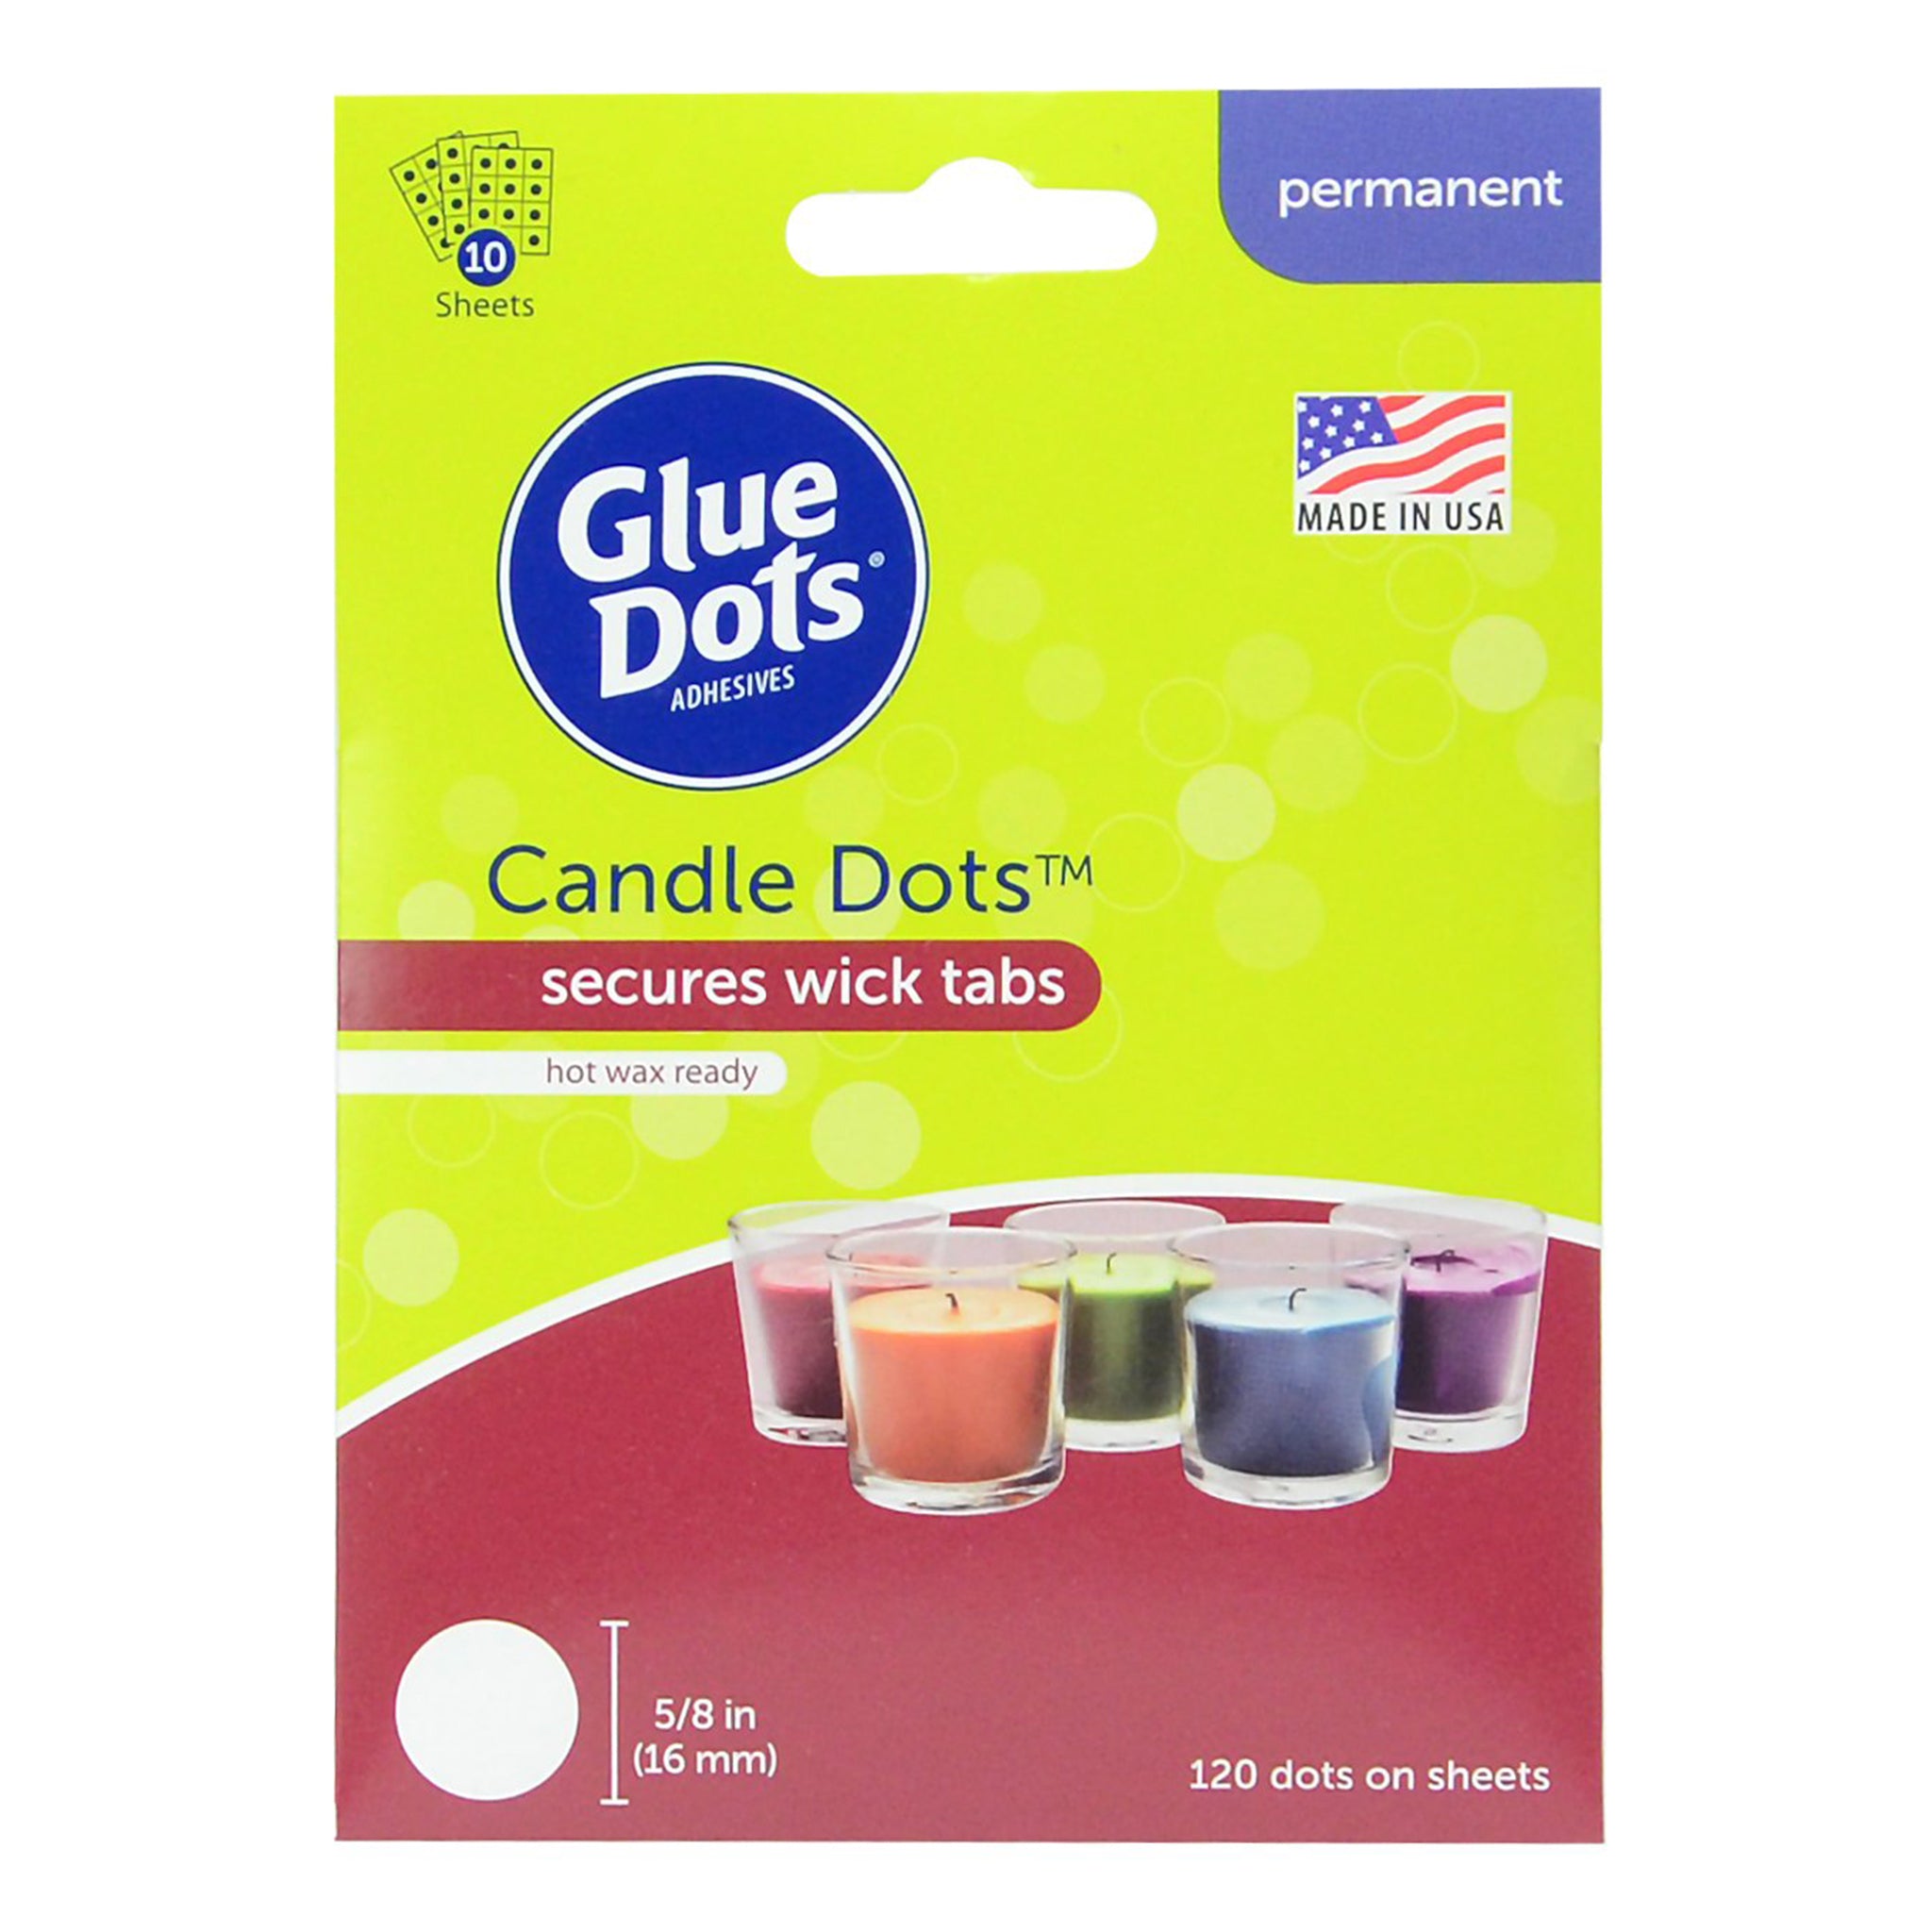 Glue Dots Candle Dots 120 pack